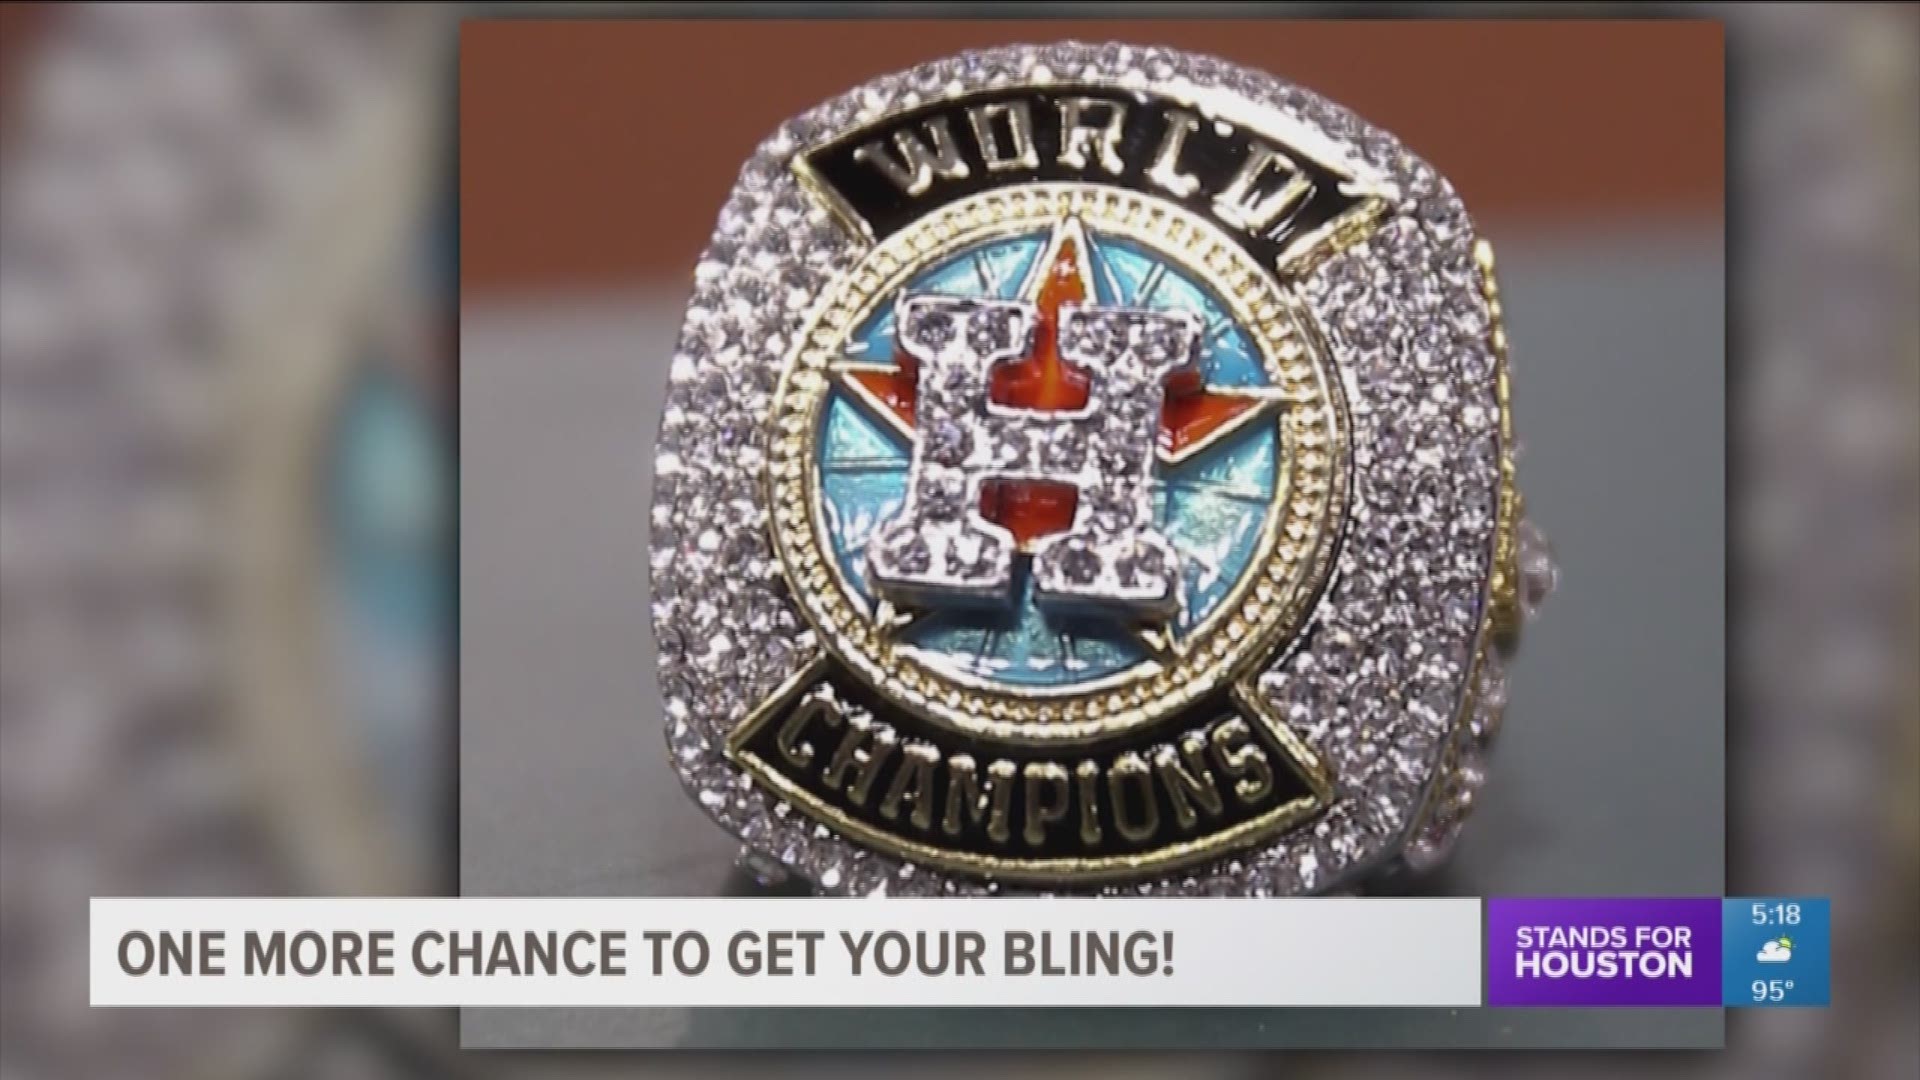 Astros to offer 4th replica ring giveaway Aug. 27